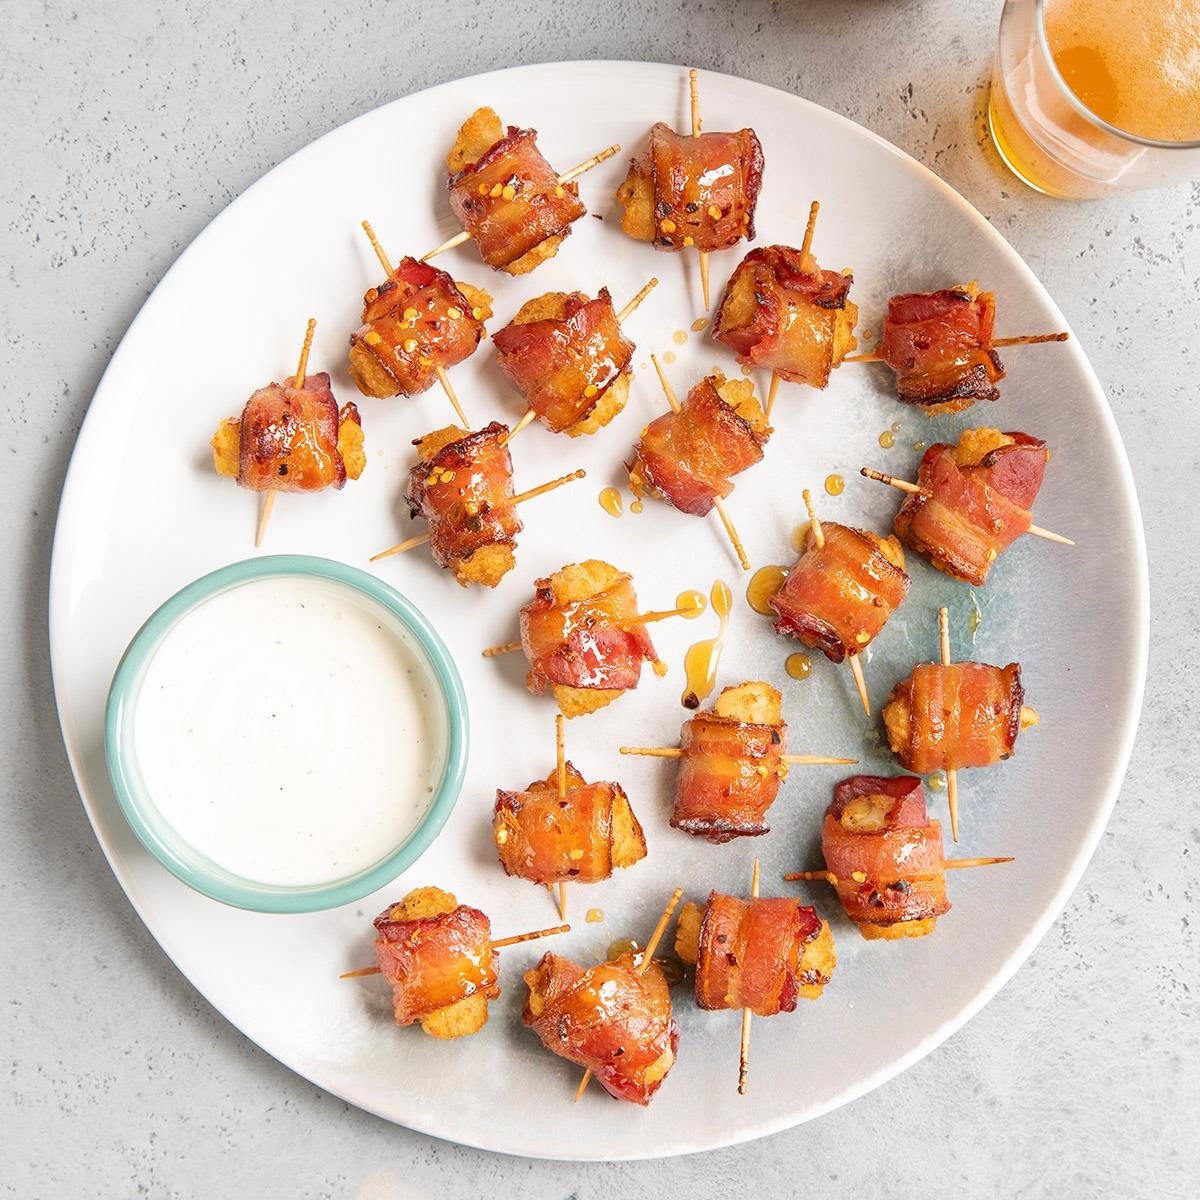 Bacon Wrapped Tater Tots Exps Ft23 158957 St 1 24 1